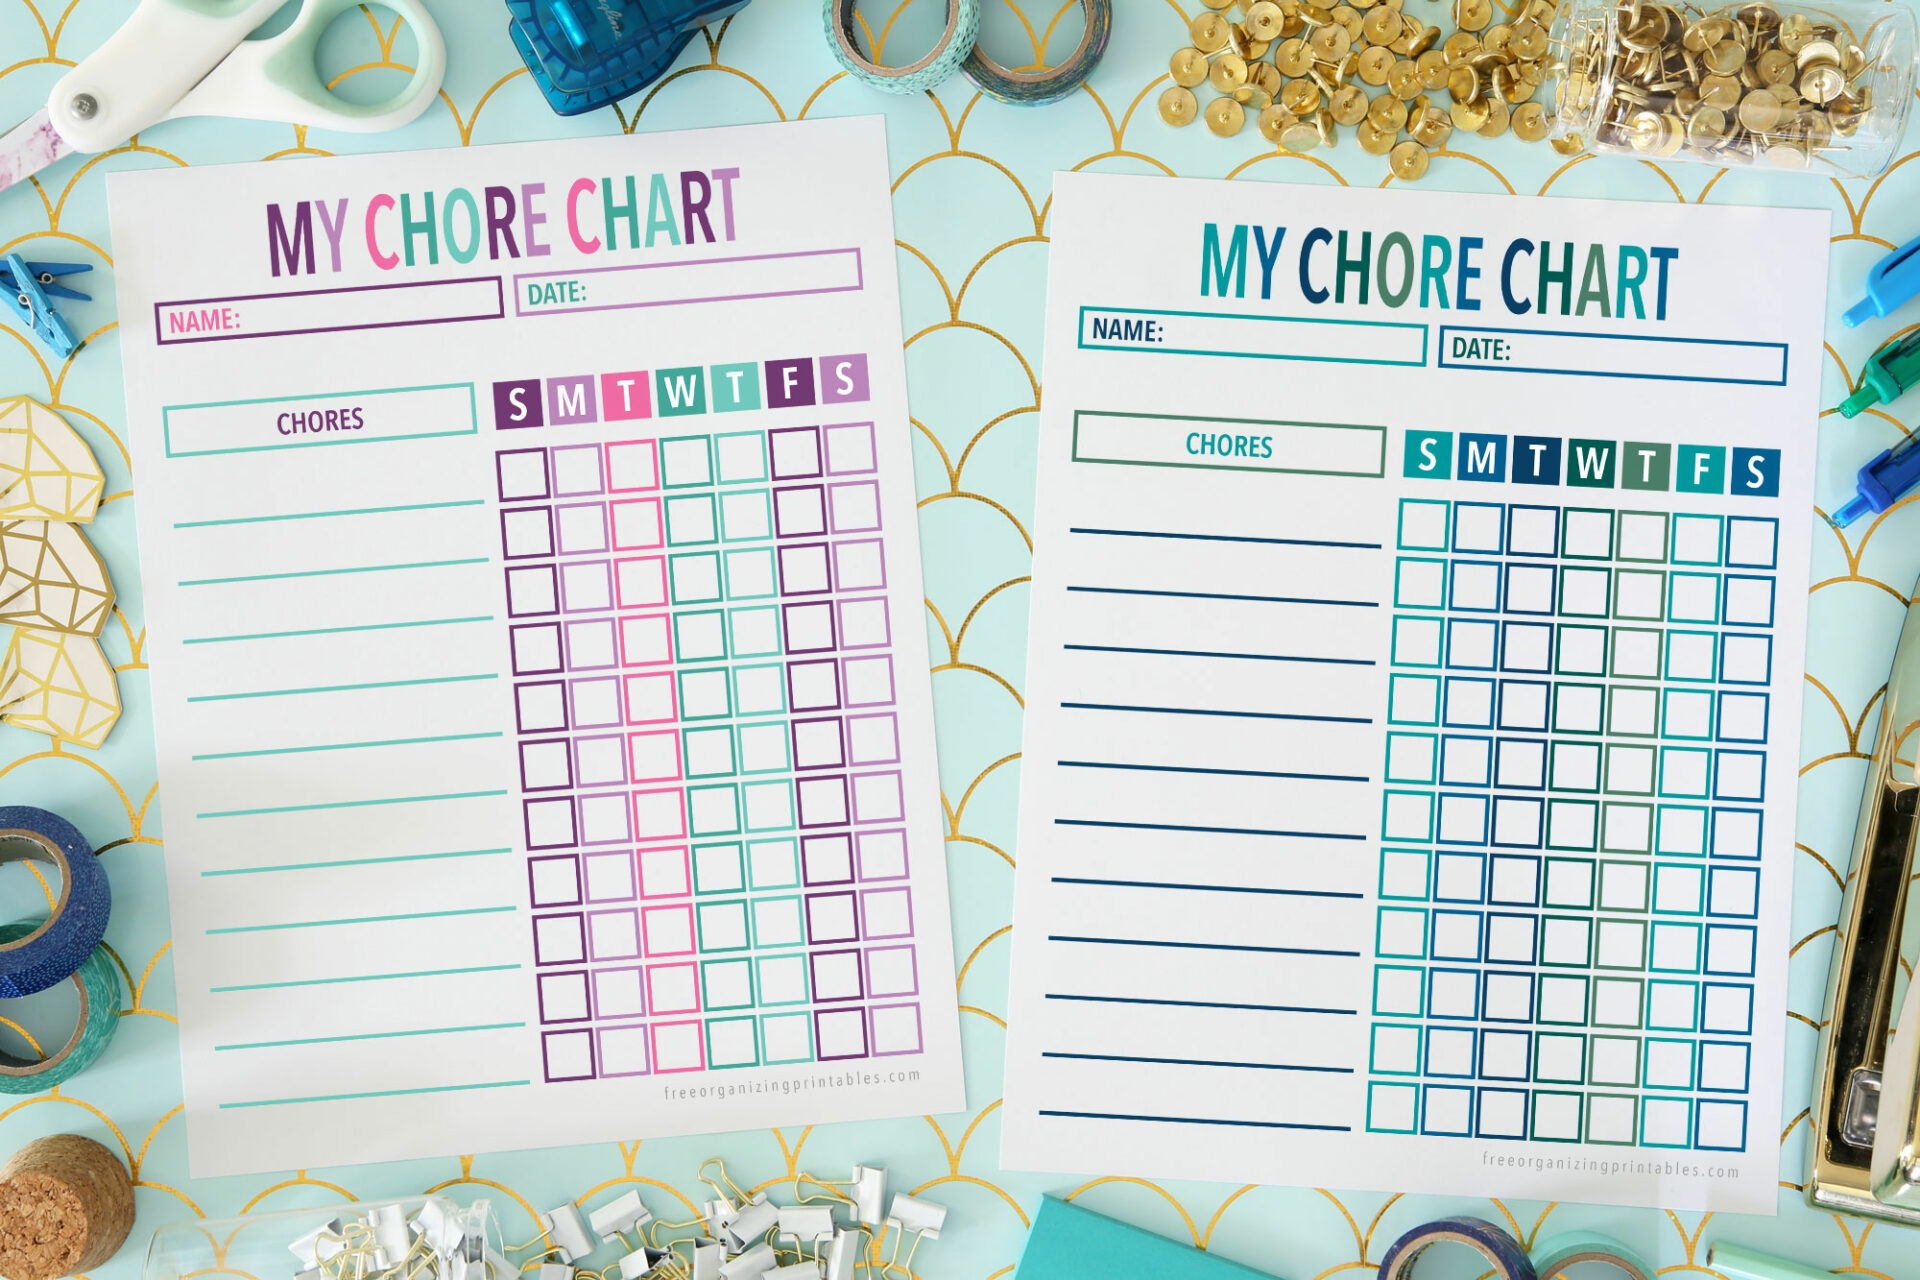 Free Printable Chore Charts For Kids And Adults - Free Printable Chore List